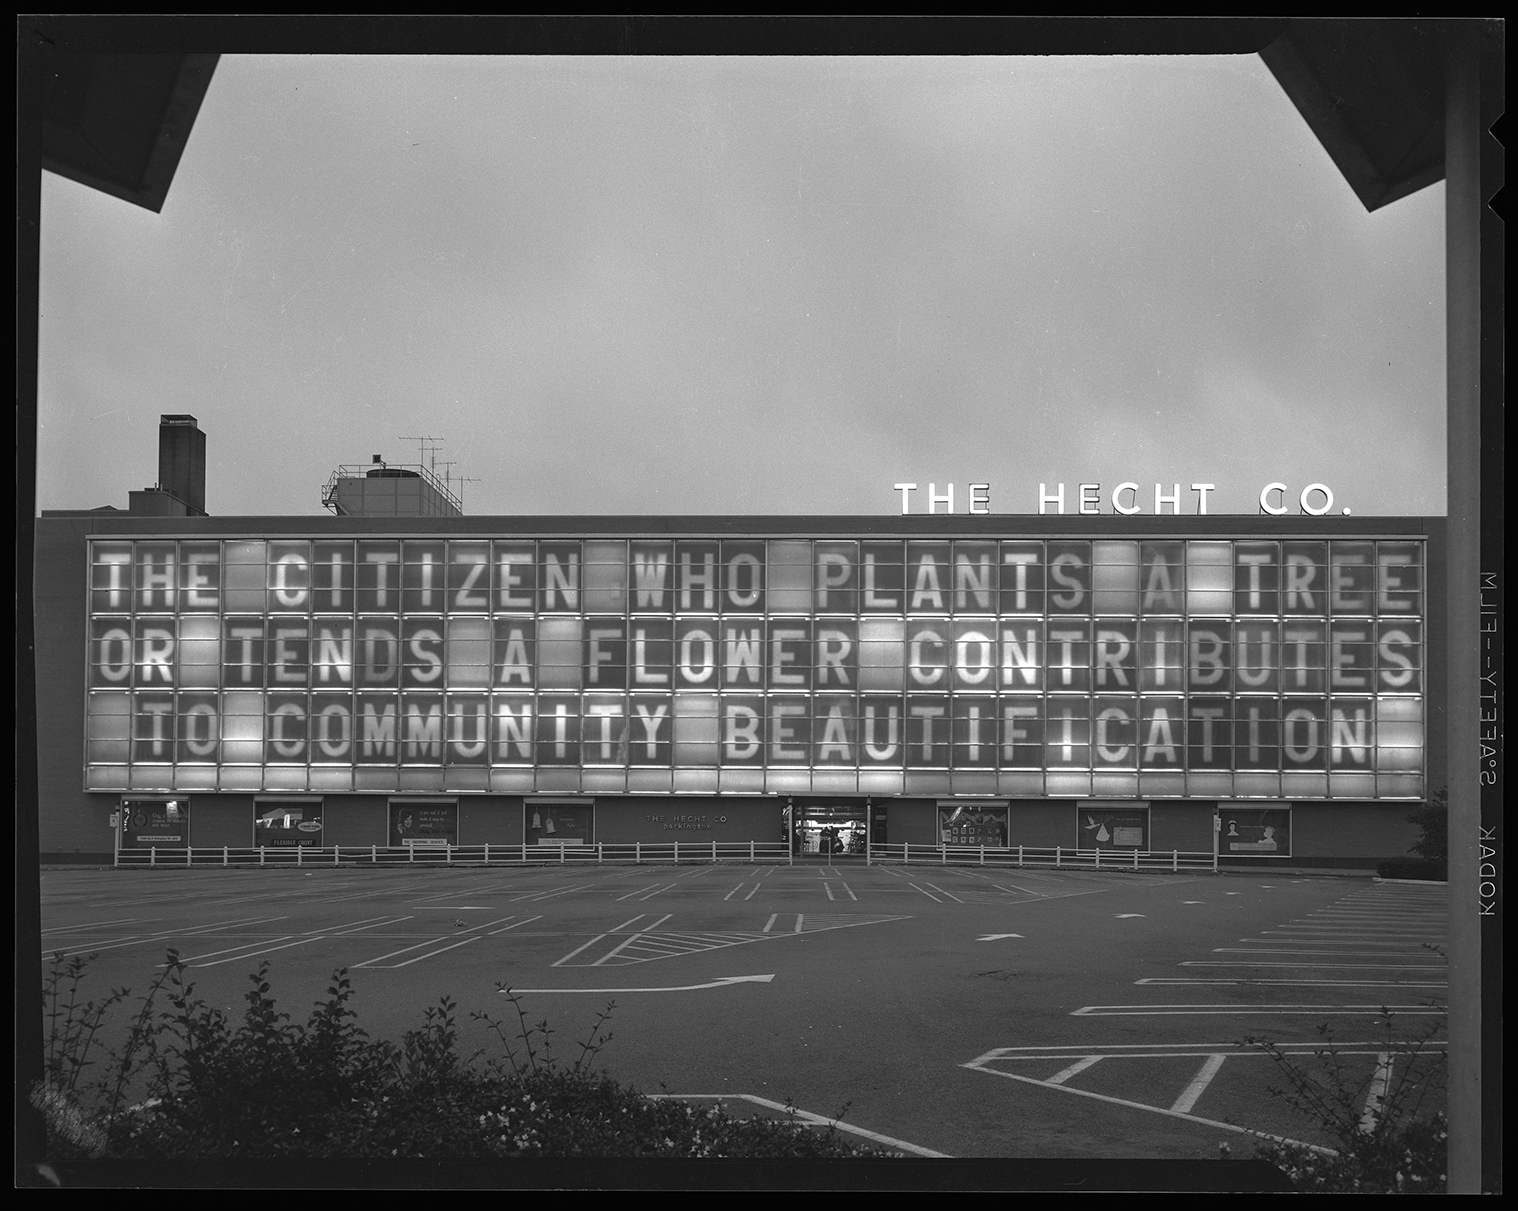 Evening shot of the large Hecht's window with lettering that says The citizen who plants a tree or tends a flower contributes to community beautification.